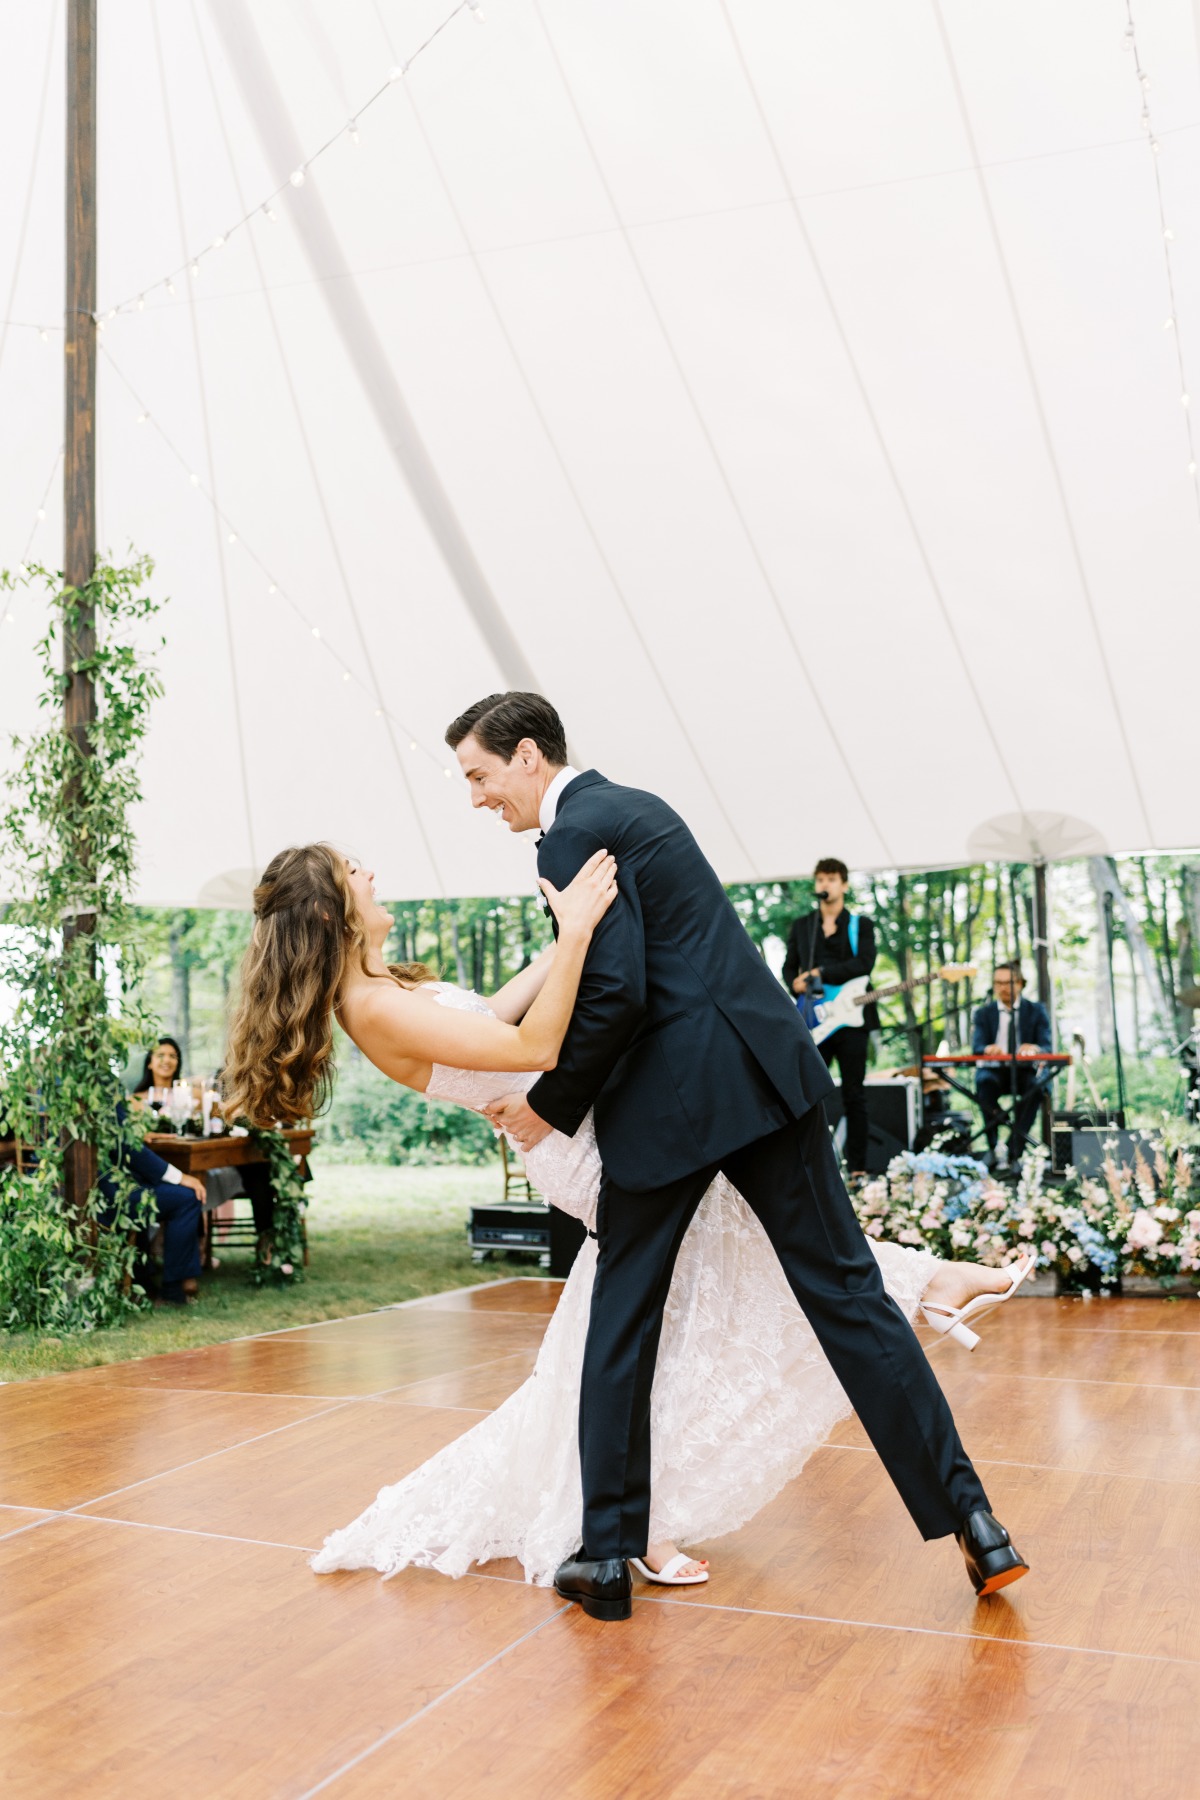 First dance dip at tented garden party wedding reception 